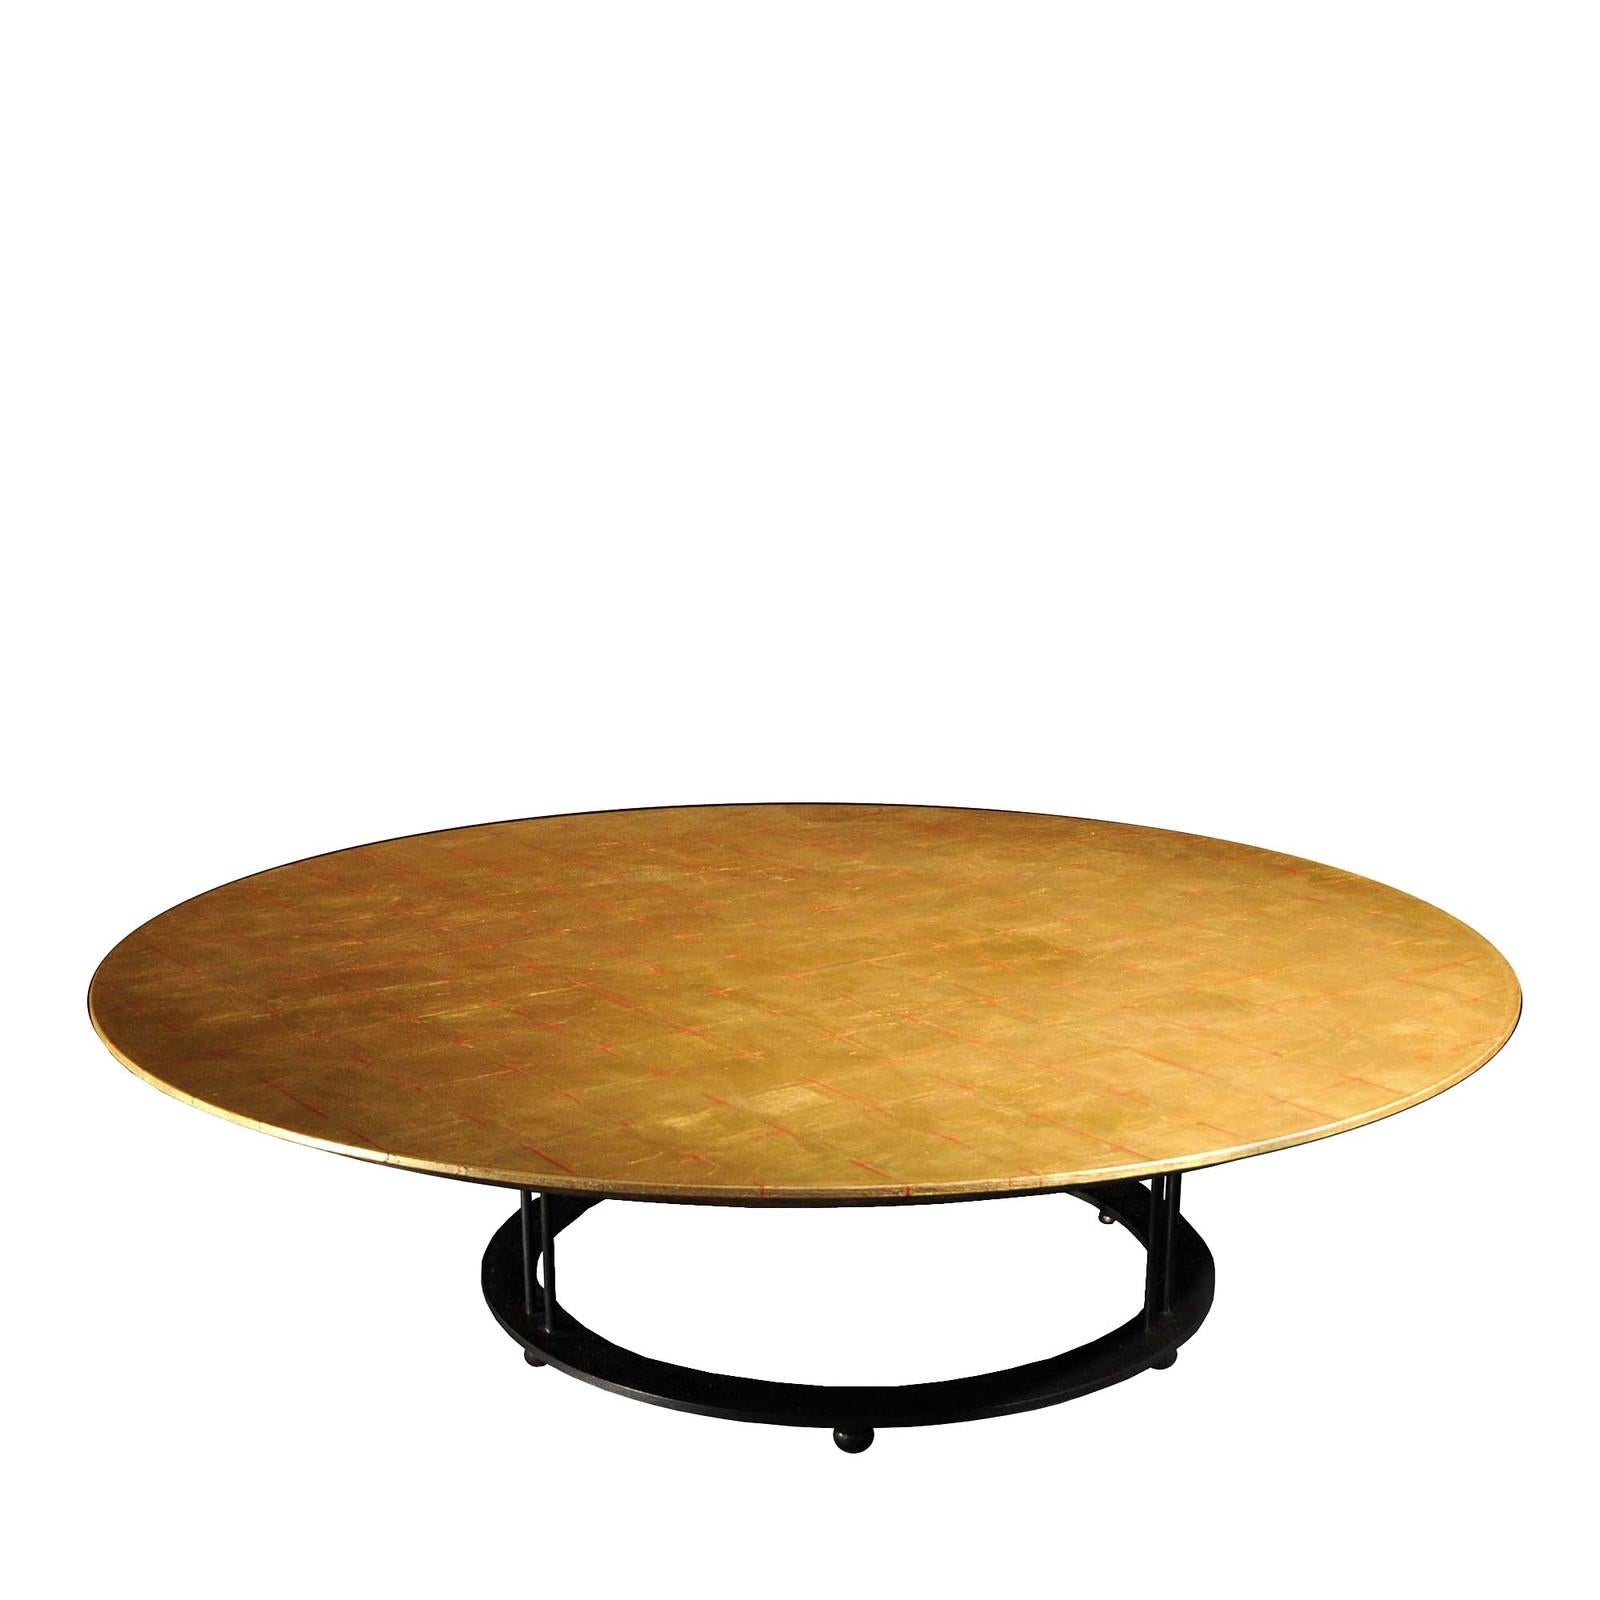 A dance of sleek lines and bold colors, this captivating coffee table features an oak top with a gold leaf finish for a dynamic and luxurious aesthetic. The table is supported by four short legs with matte black powder coating attached to a circular